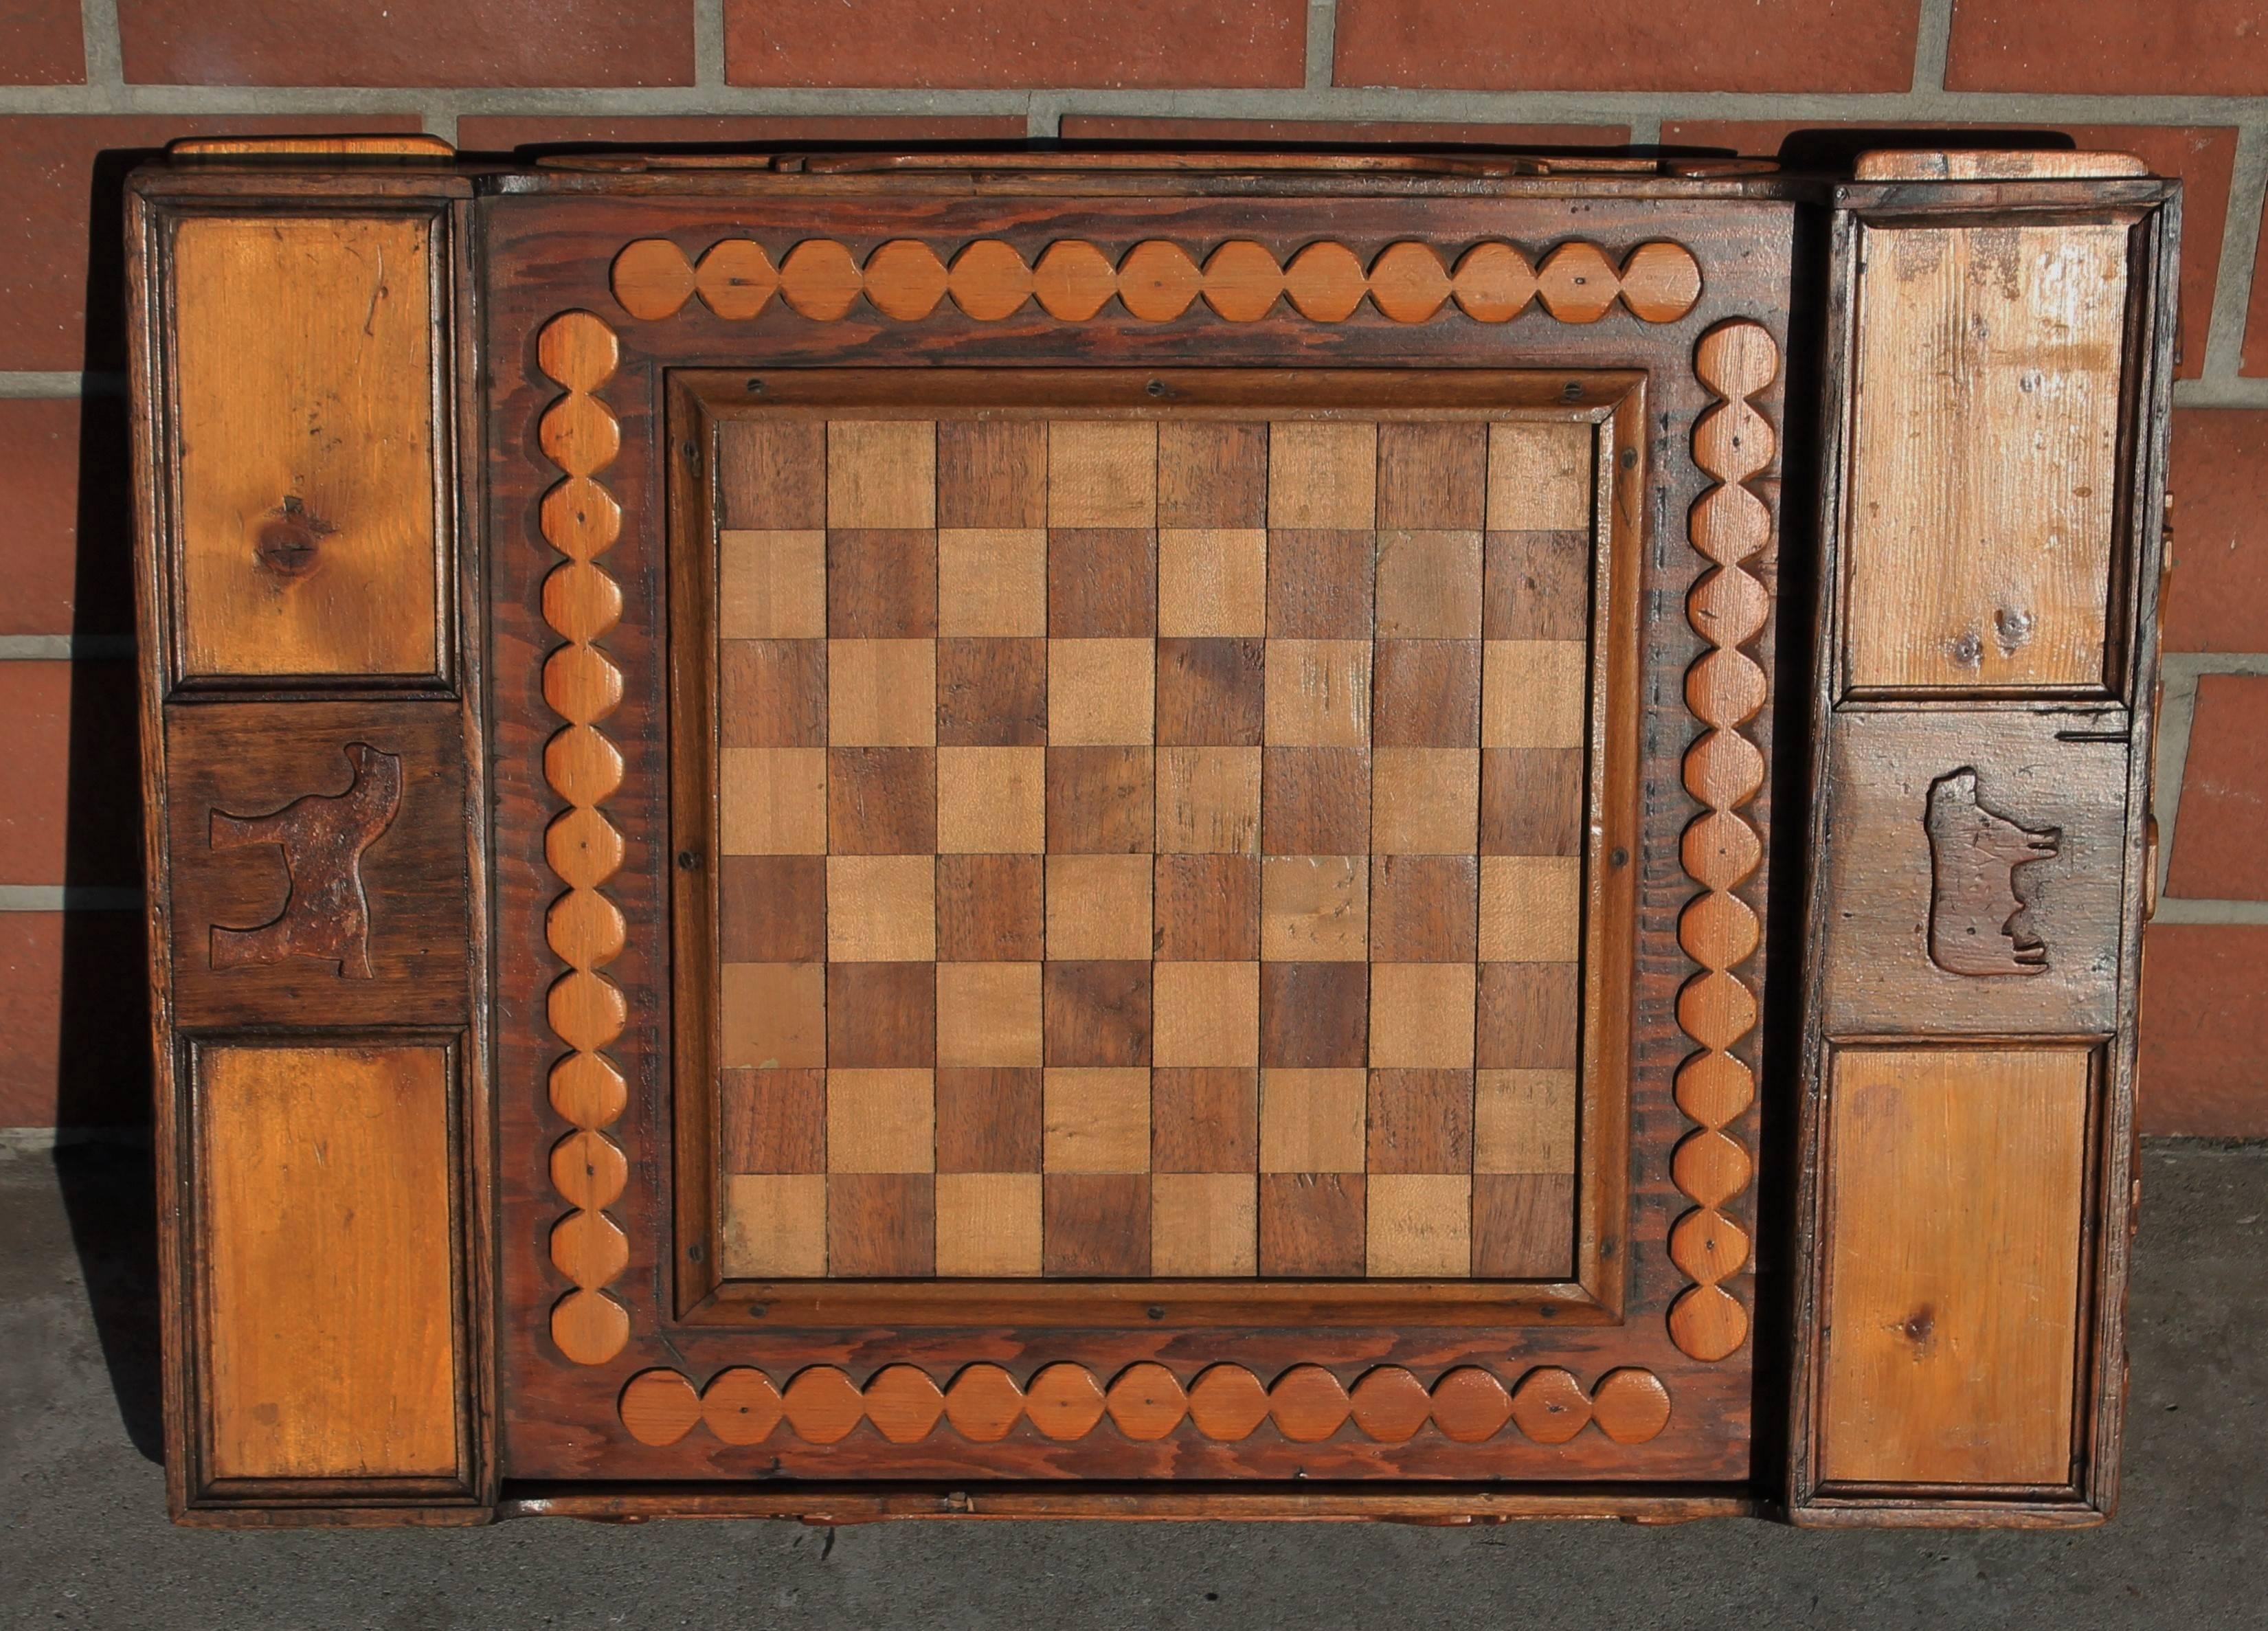 This amazing inlaid early 20th century game board is a reversible and contains the original wood checkers with in the hidden drawers. This handmade board also has hearts and arrows on the outside picture frame molding. The condition is very good.